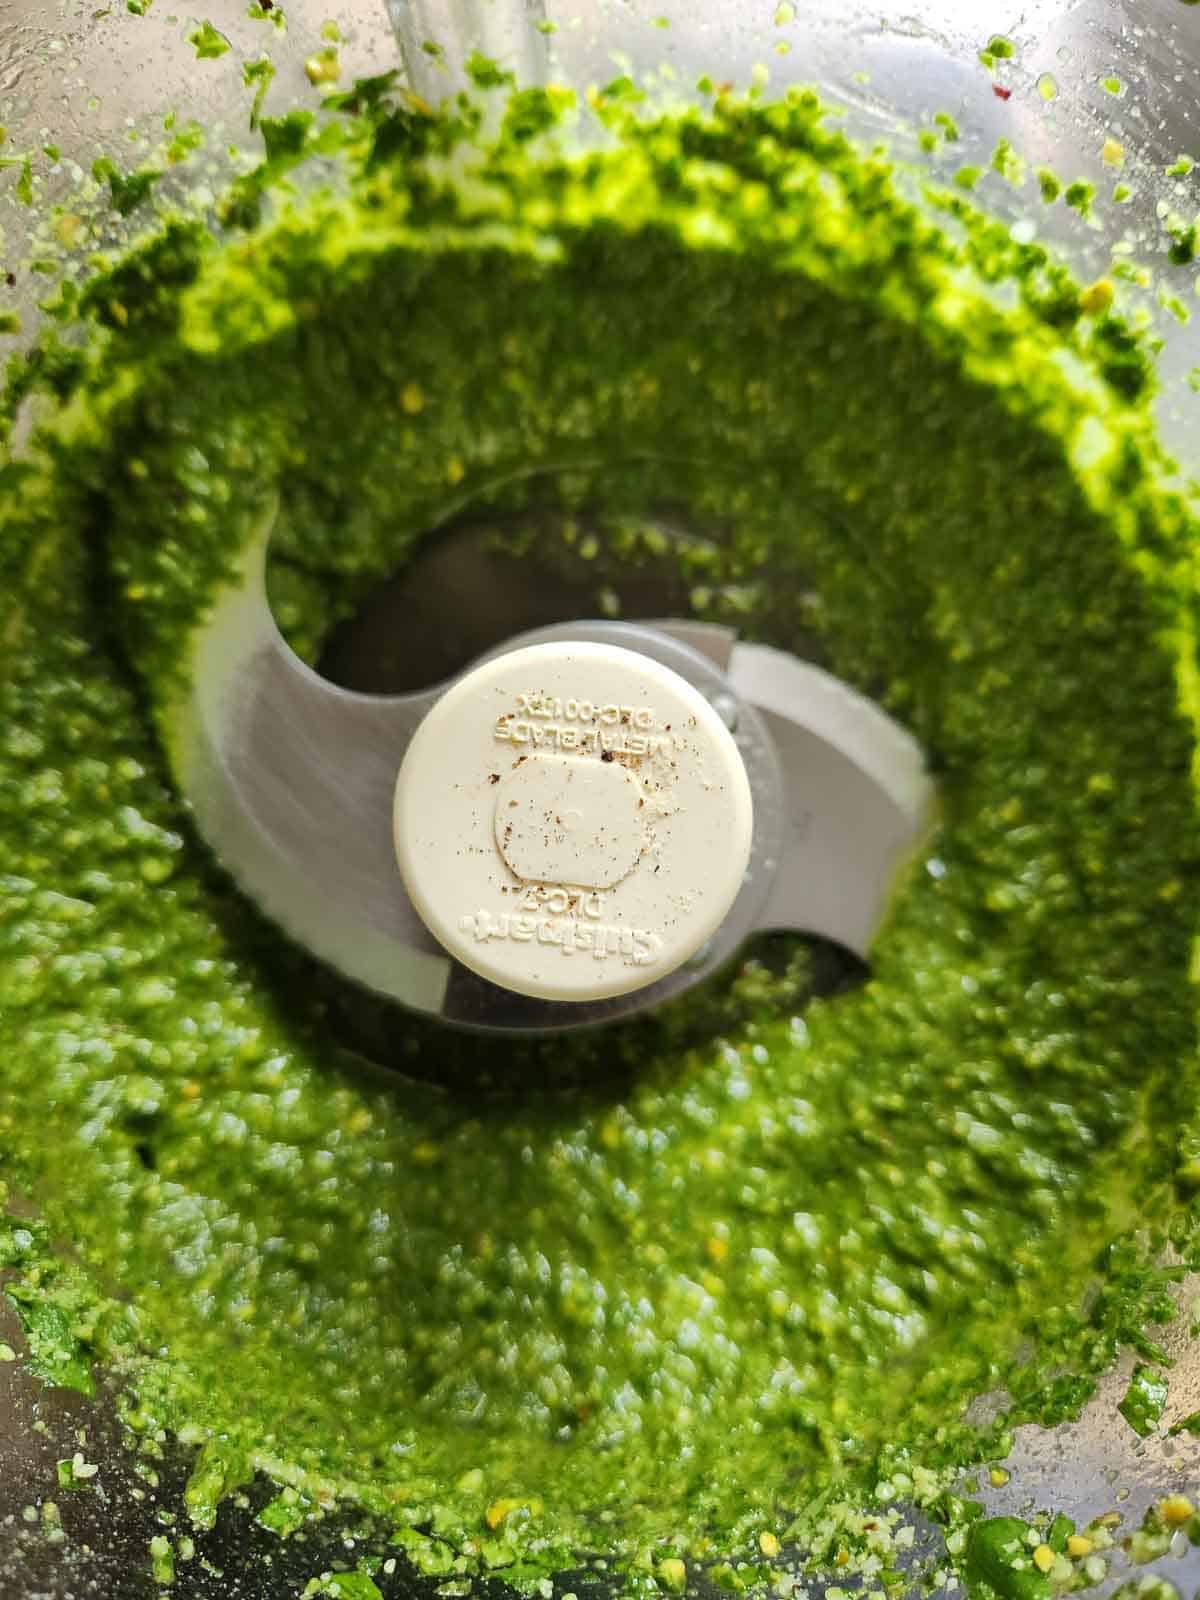 Pesto blended in a food processor.